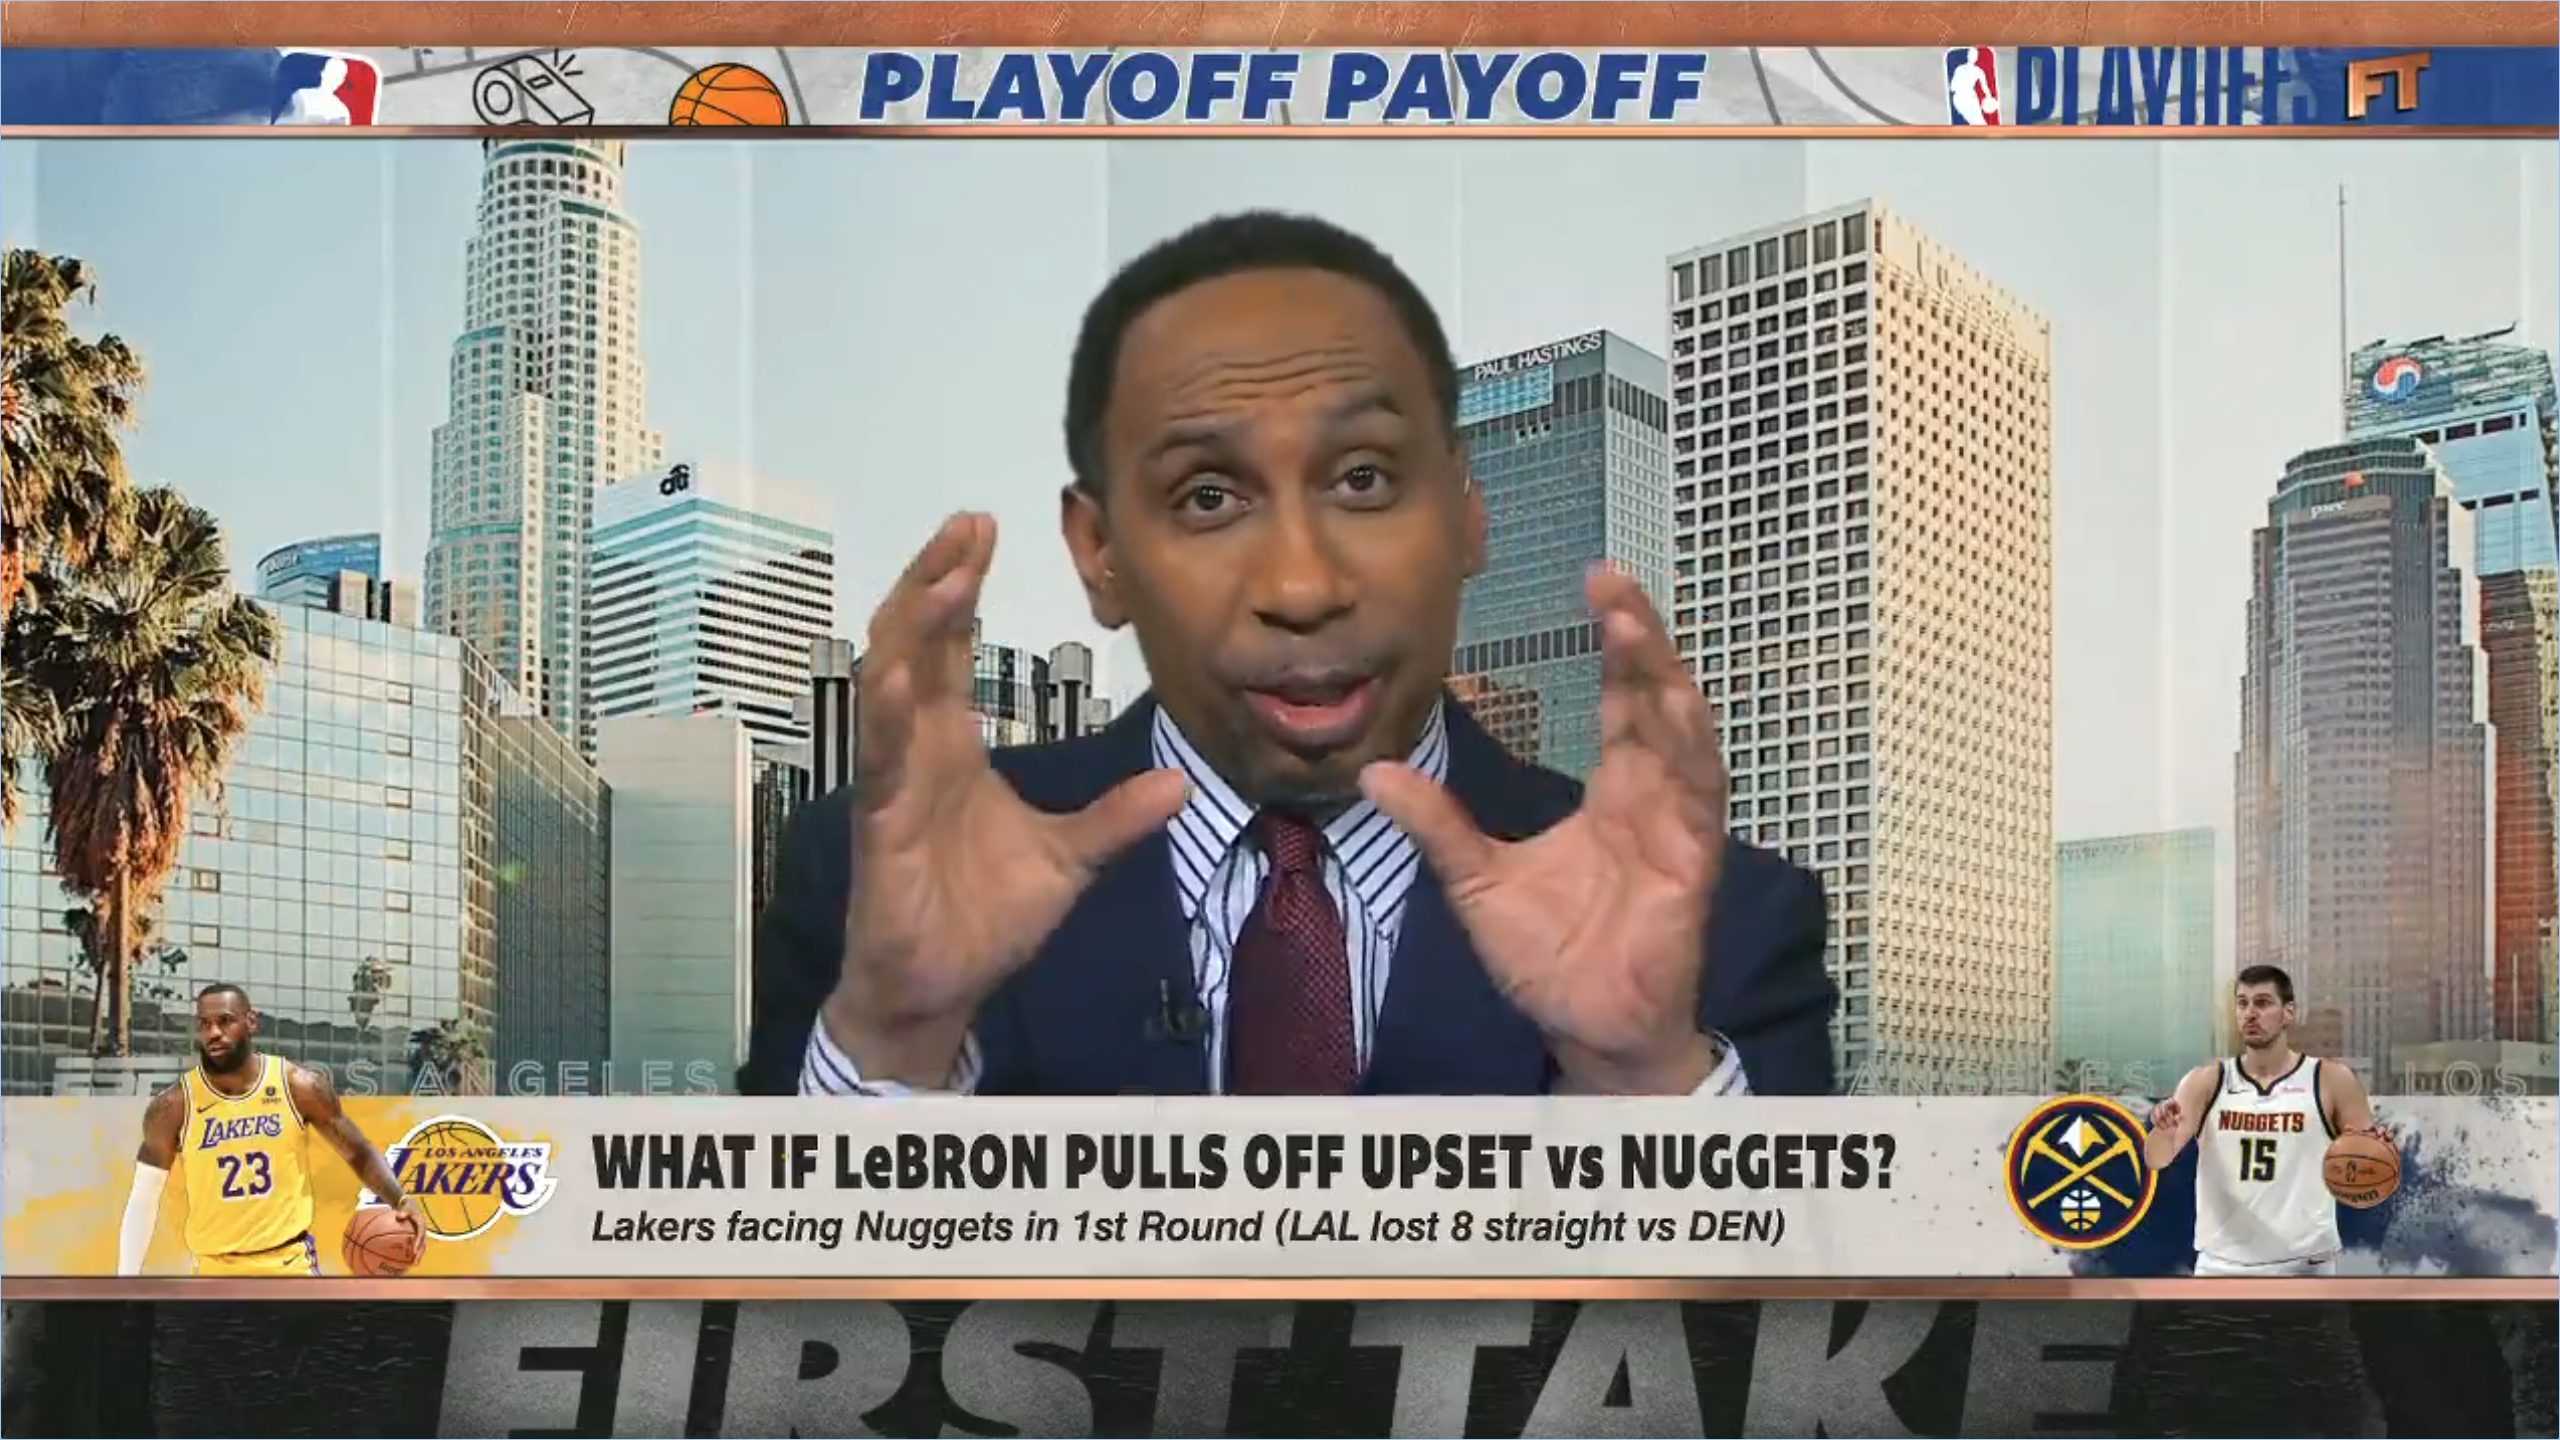 First Take star Stephen A. Smith made a claim concerning LeBron James and his path to possibly being the GOAT of basketball over Michael Jordan